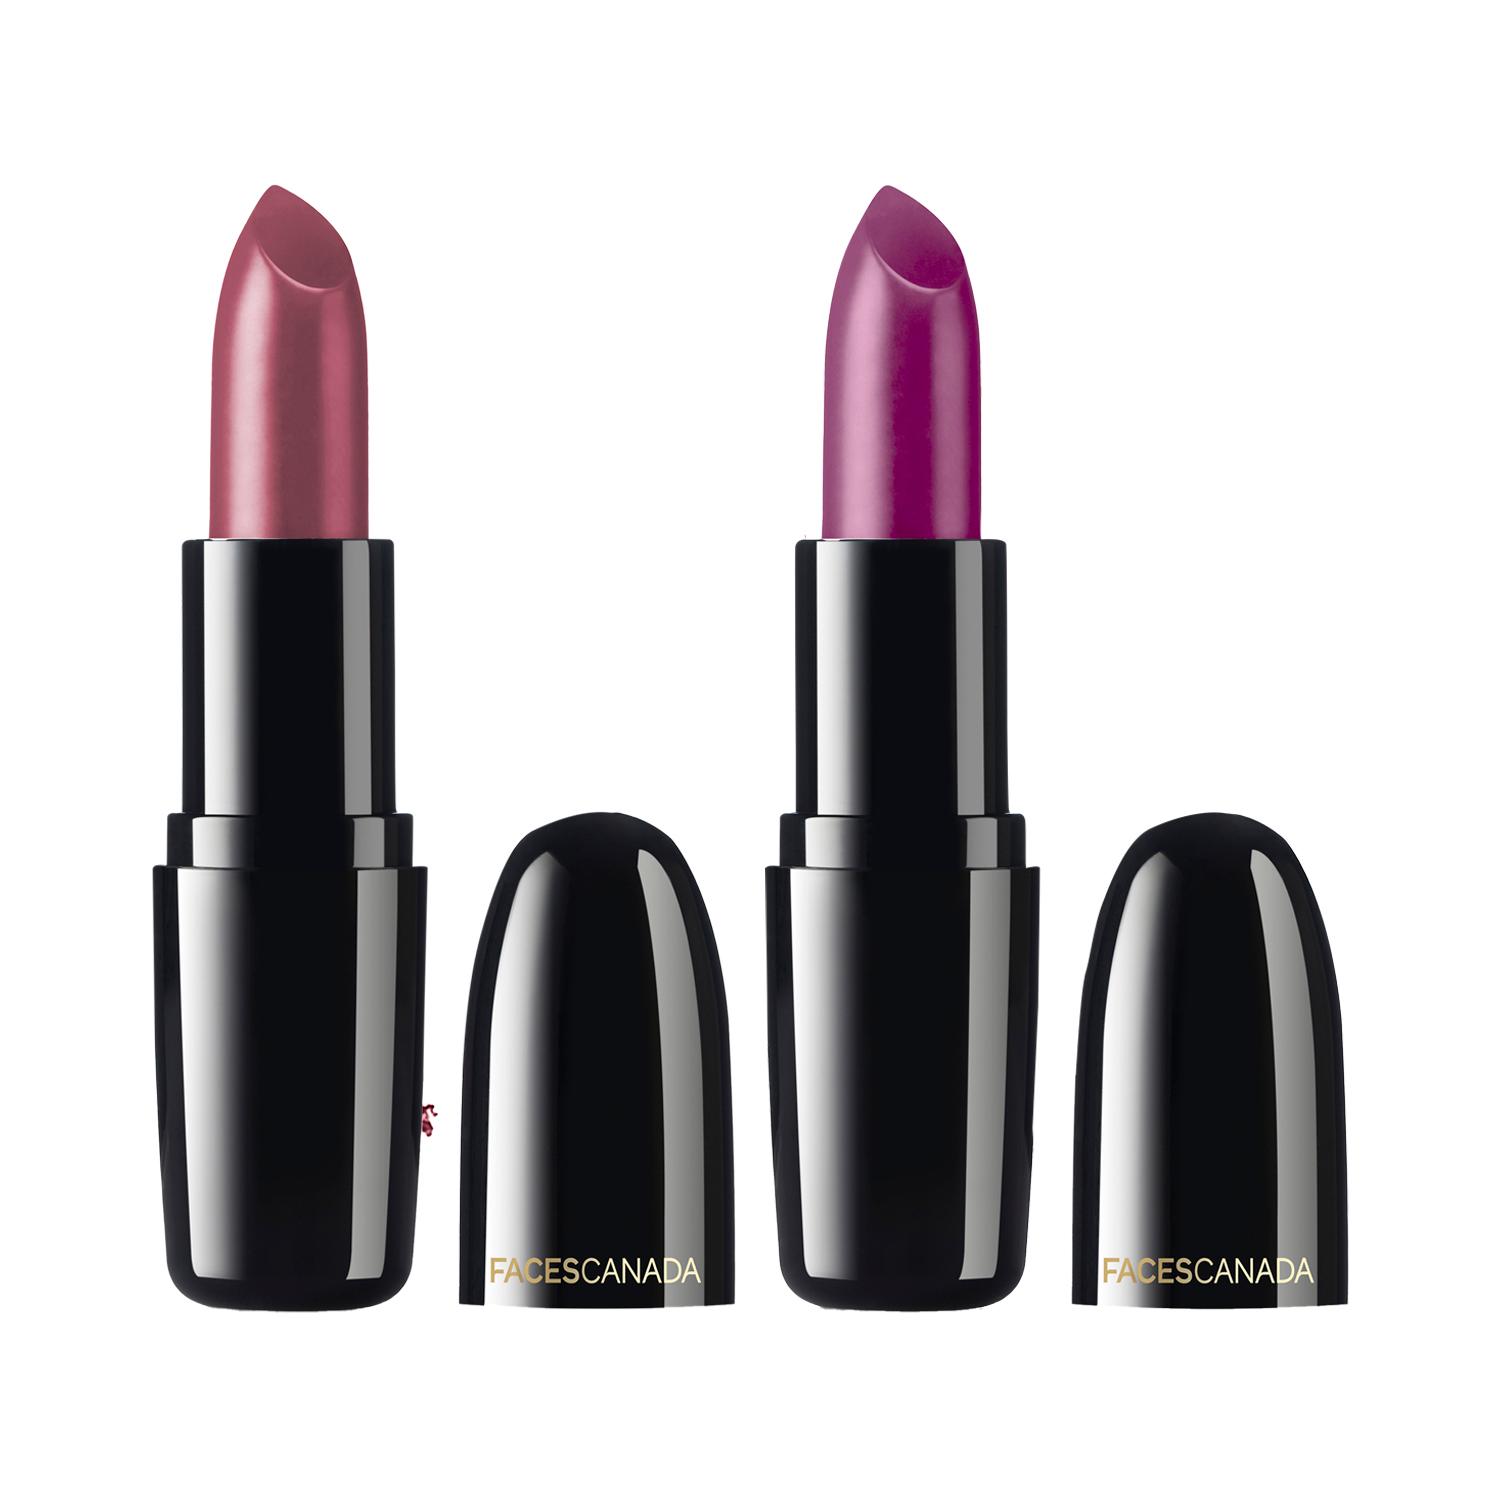 Faces Canada Weightless Creme Finish Lipstick - Imperial Plum and Plum Peach (4g x 2) Combo